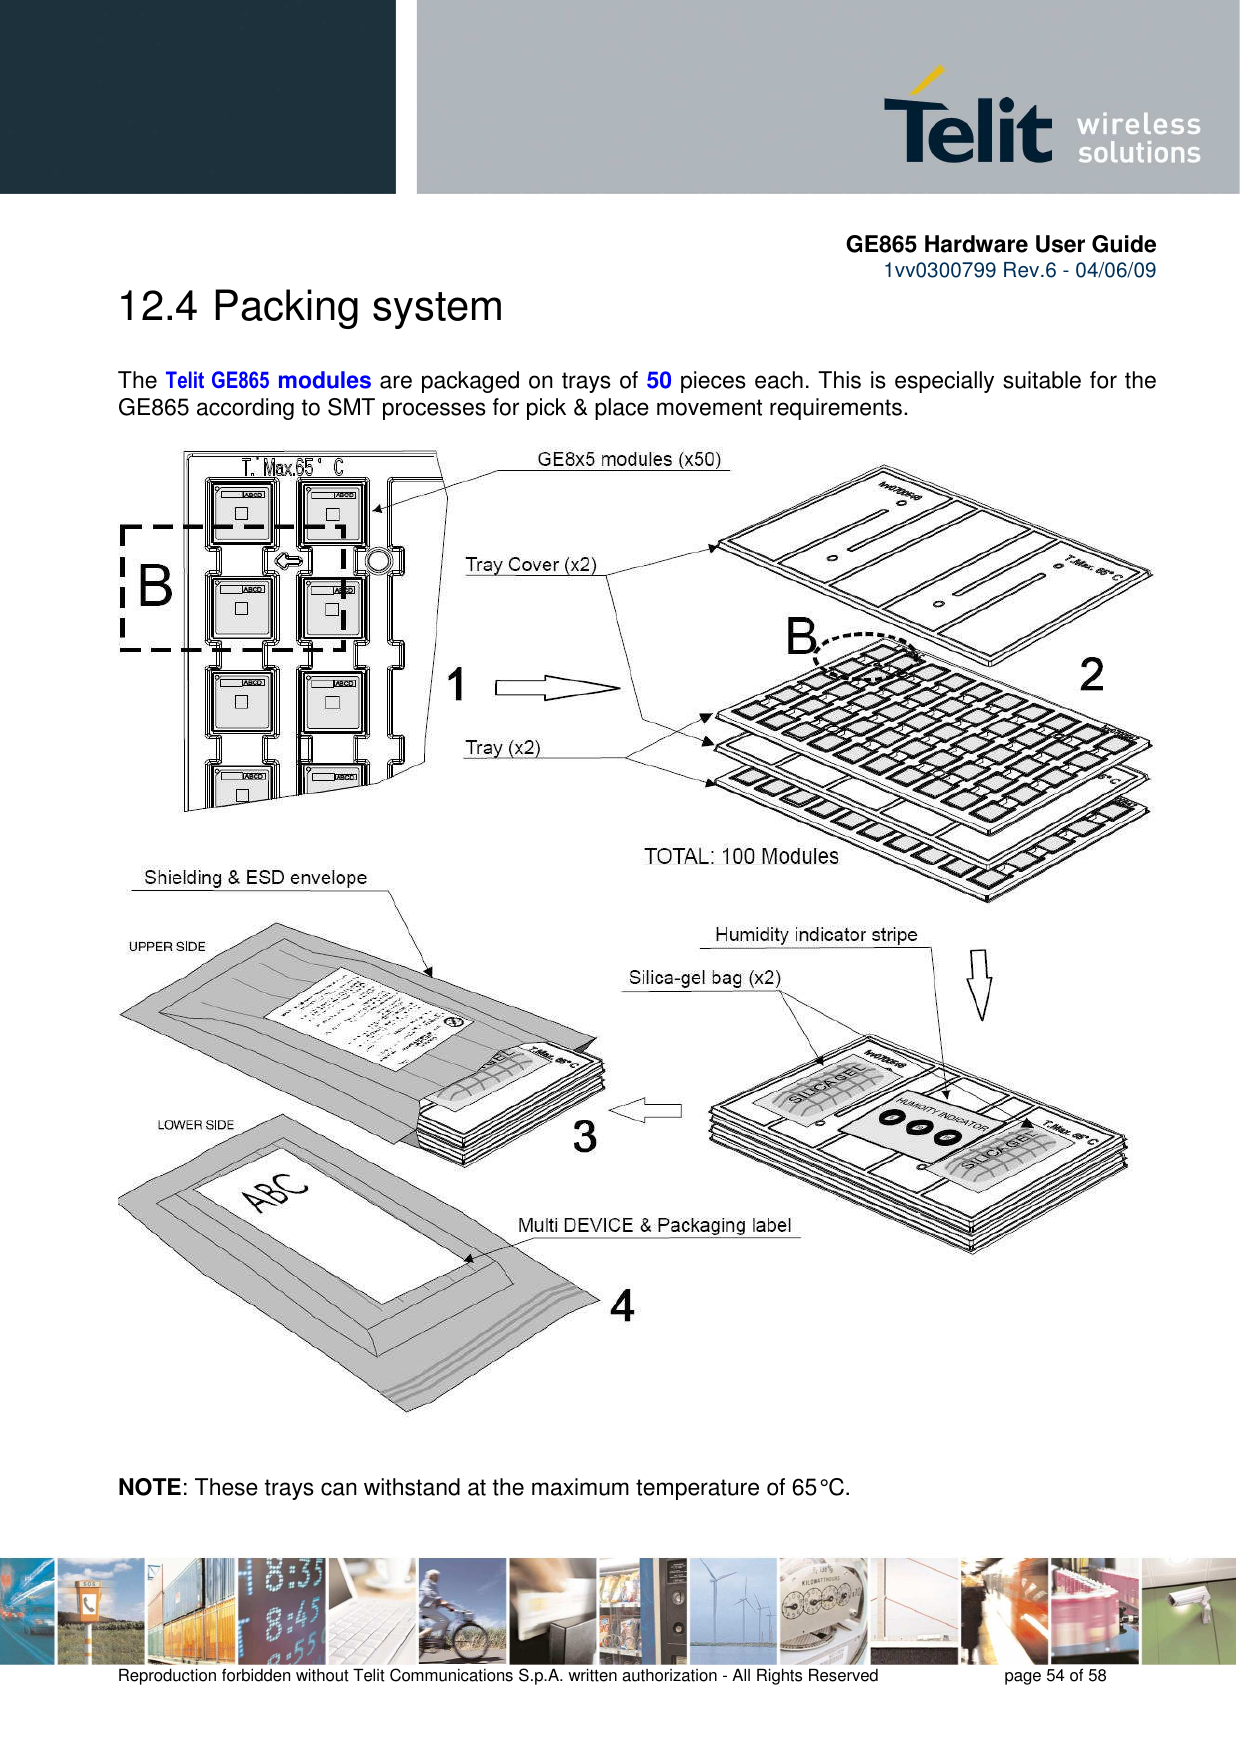       GE865 Hardware User Guide 1vv0300799 Rev.6 - 04/06/09      Reproduction forbidden without Telit Communications S.p.A. written authorization - All Rights Reserved    page 54 of 58  12.4  Packing system  The Telit GE865 modules are packaged on trays of 50 pieces each. This is especially suitable for the GE865 according to SMT processes for pick &amp; place movement requirements.    NOTE: These trays can withstand at the maximum temperature of 65° C.  